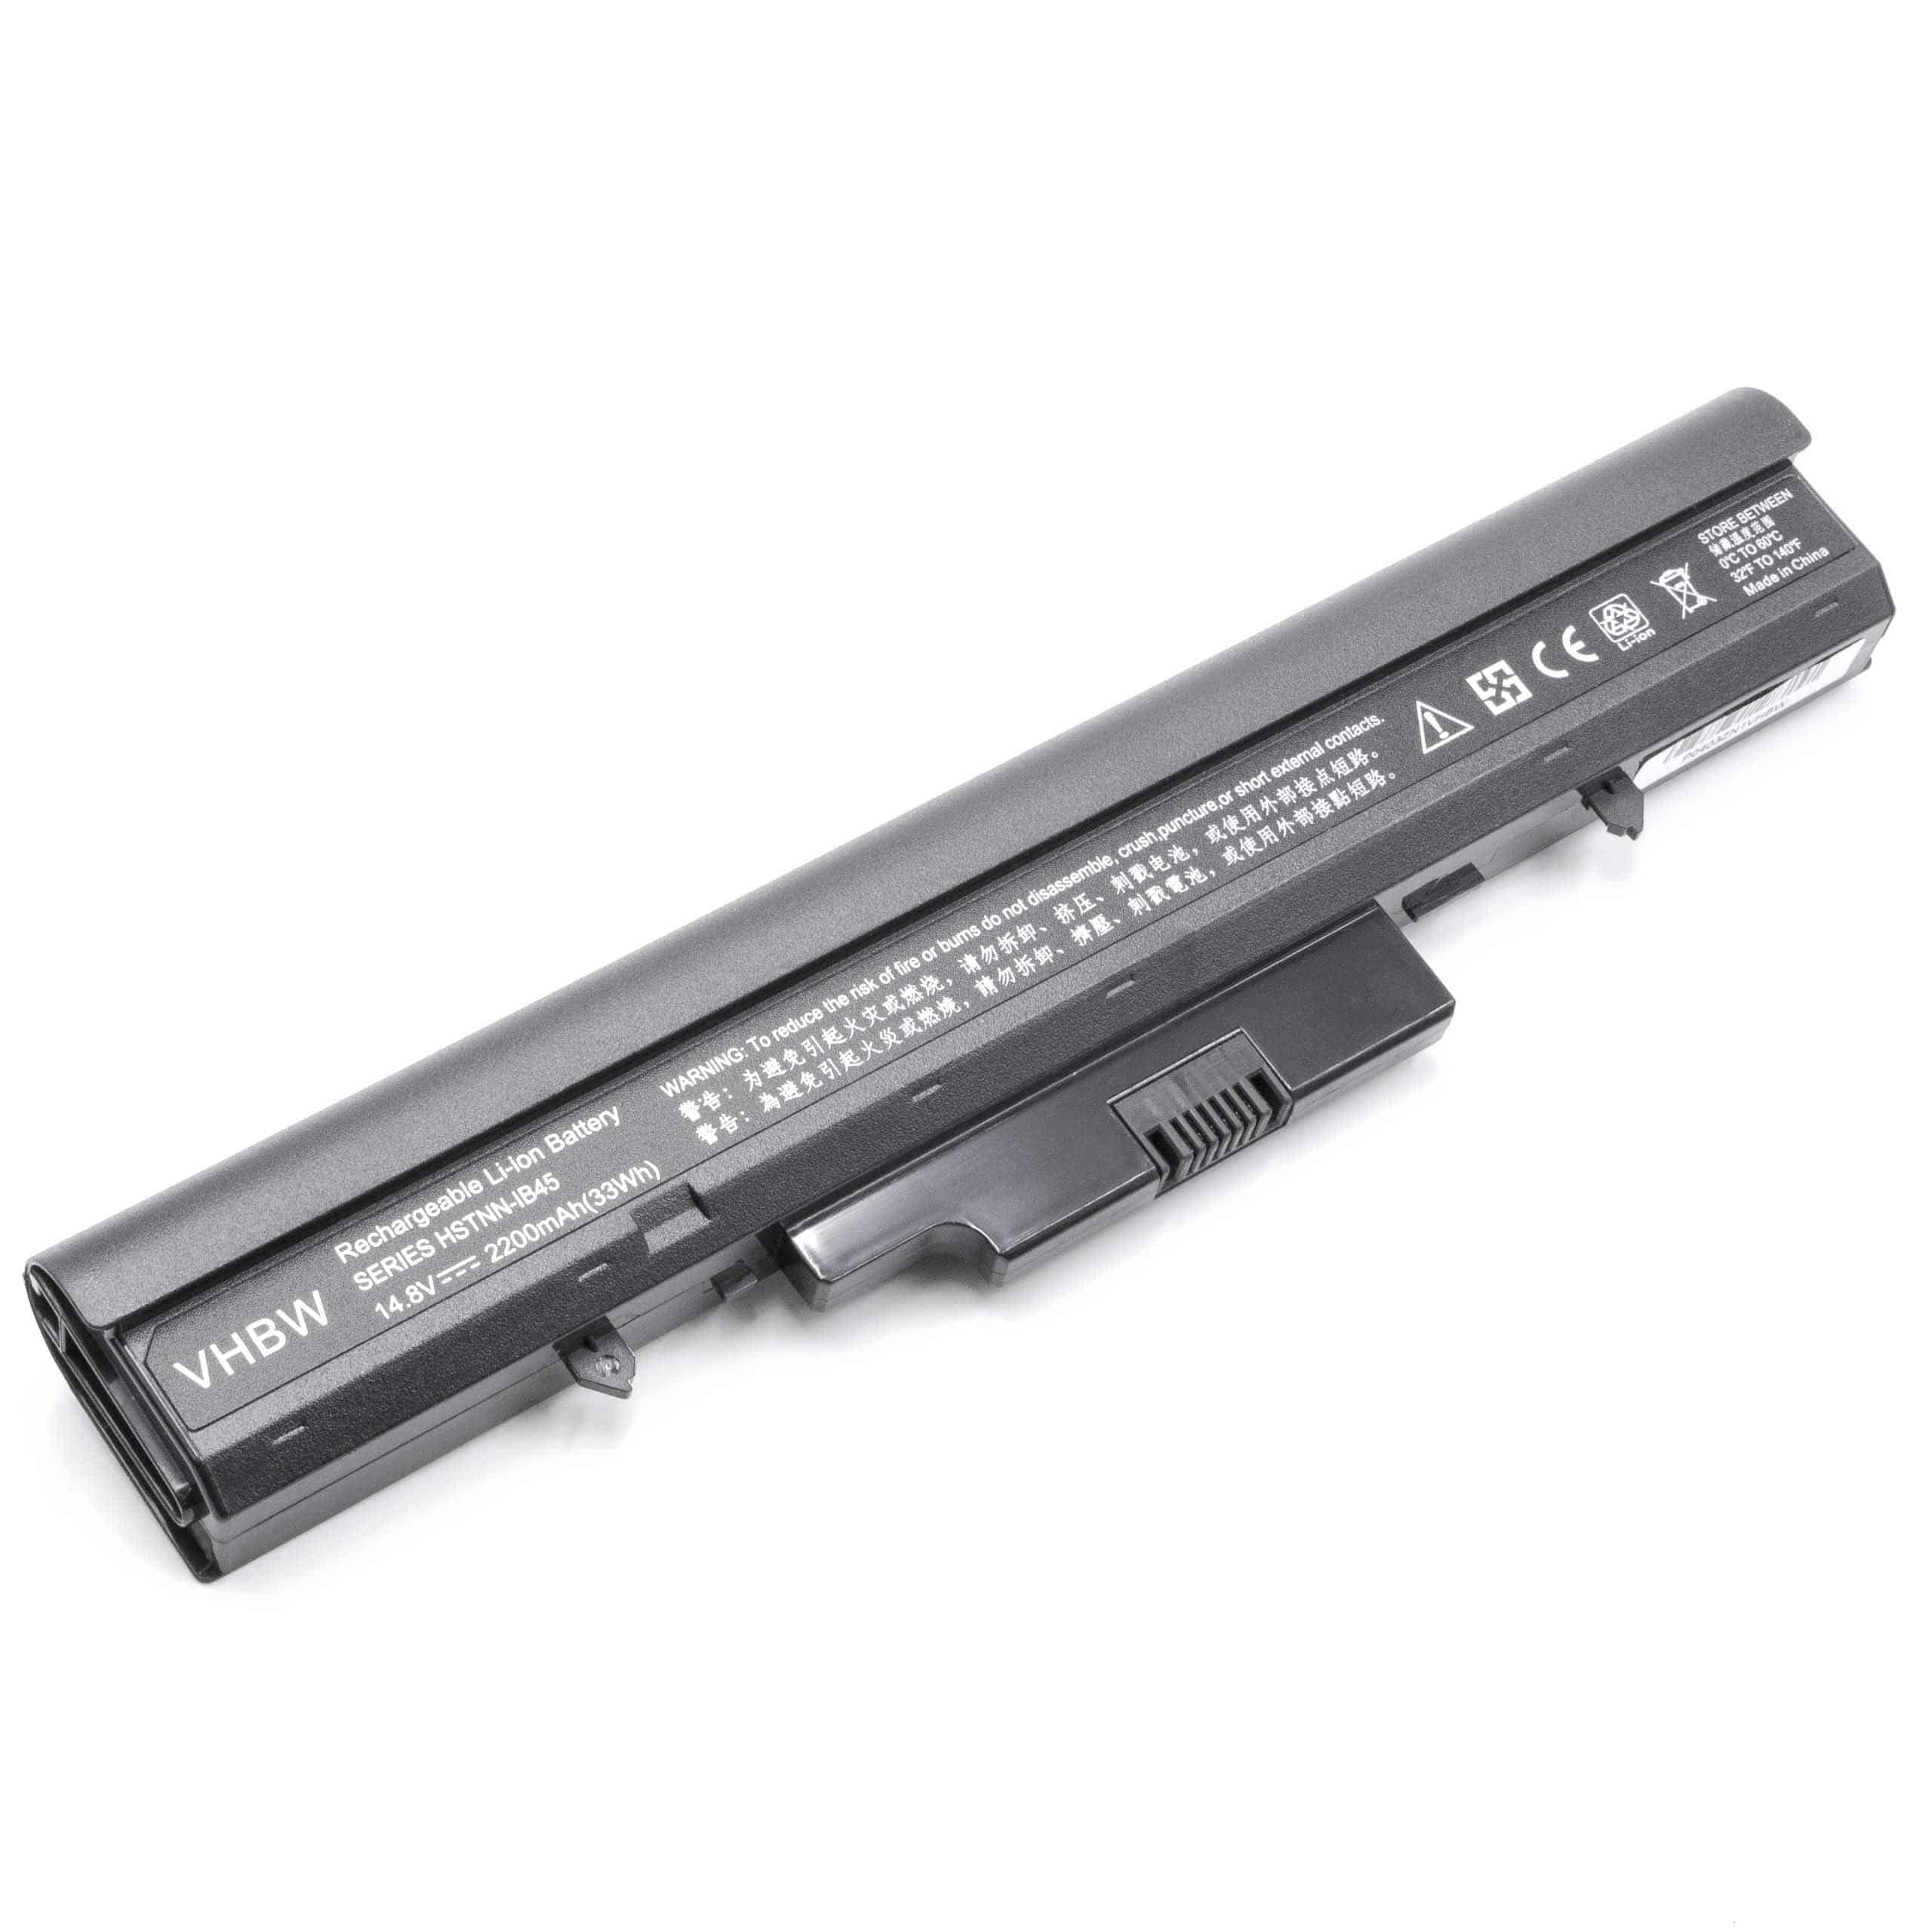 Notebook Battery Replacement for HP 440264-ABC, 440265-ABC, 440266-ABC - 2200mAh 14.8V Li-Ion, black